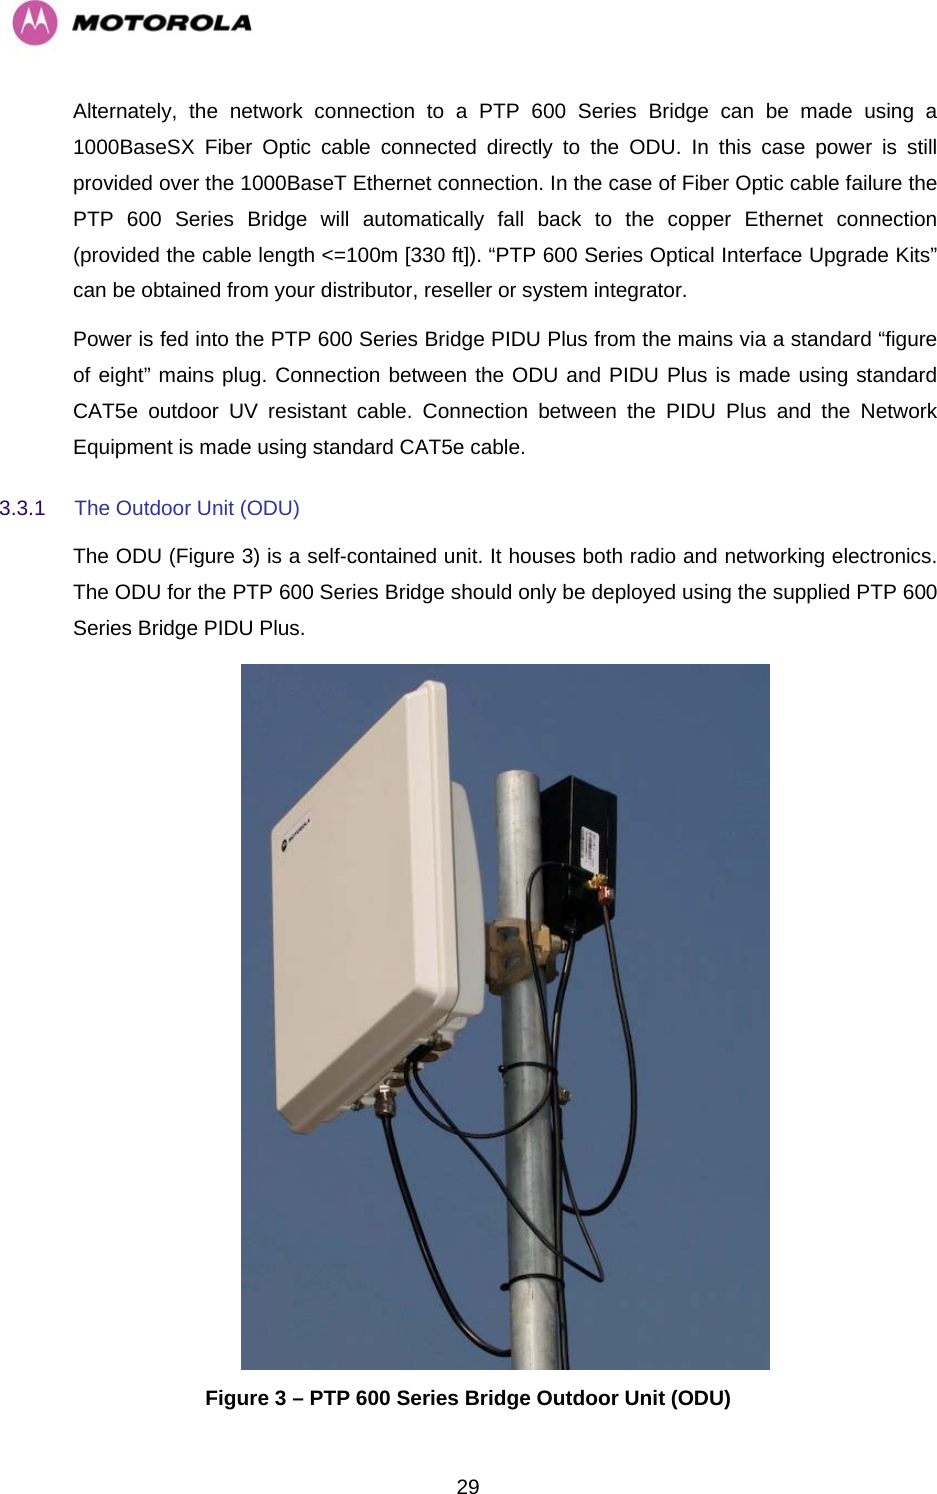   29Alternately, the network connection to a PTP 600 Series Bridge can be made using a 1000BaseSX Fiber Optic cable connected directly to the ODU. In this case power is still provided over the 1000BaseT Ethernet connection. In the case of Fiber Optic cable failure the PTP 600 Series Bridge will automatically fall back to the copper Ethernet connection (provided the cable length &lt;=100m [330 ft]). “PTP 600 Series Optical Interface Upgrade Kits” can be obtained from your distributor, reseller or system integrator. Power is fed into the PTP 600 Series Bridge PIDU Plus from the mains via a standard “figure of eight” mains plug. Connection between the ODU and PIDU Plus is made using standard CAT5e outdoor UV resistant cable. Connection between the PIDU Plus and the Network Equipment is made using standard CAT5e cable. 3.3.1  The Outdoor Unit (ODU) The ODU (Figure 3) is a self-contained unit. It houses both radio and networking electronics. The ODU for the PTP 600 Series Bridge should only be deployed using the supplied PTP 600 Series Bridge PIDU Plus.   Figure 3 – PTP 600 Series Bridge Outdoor Unit (ODU) 